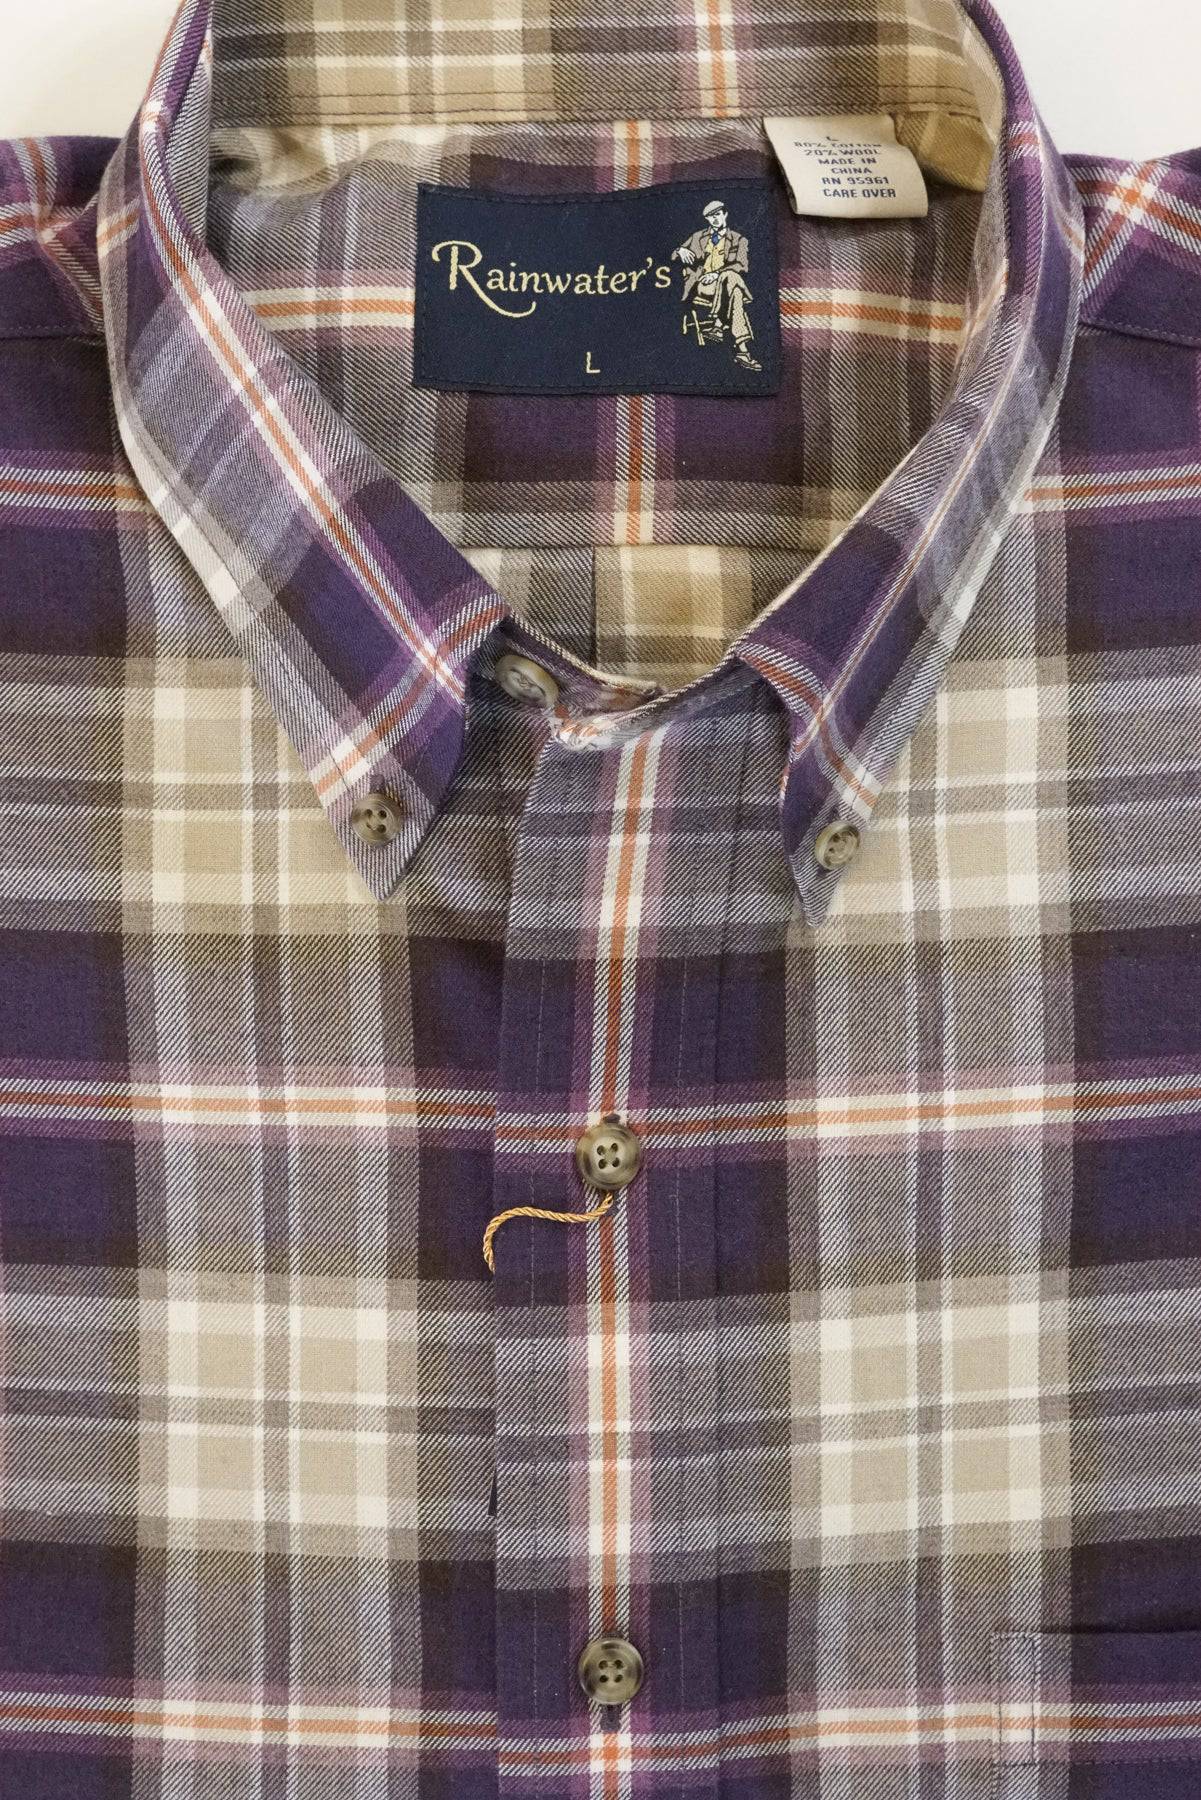 Purple and Tan Plaid Button Down in Cotton & Wool by Rainwater's - Rainwater's Men's Clothing and Tuxedo Rental